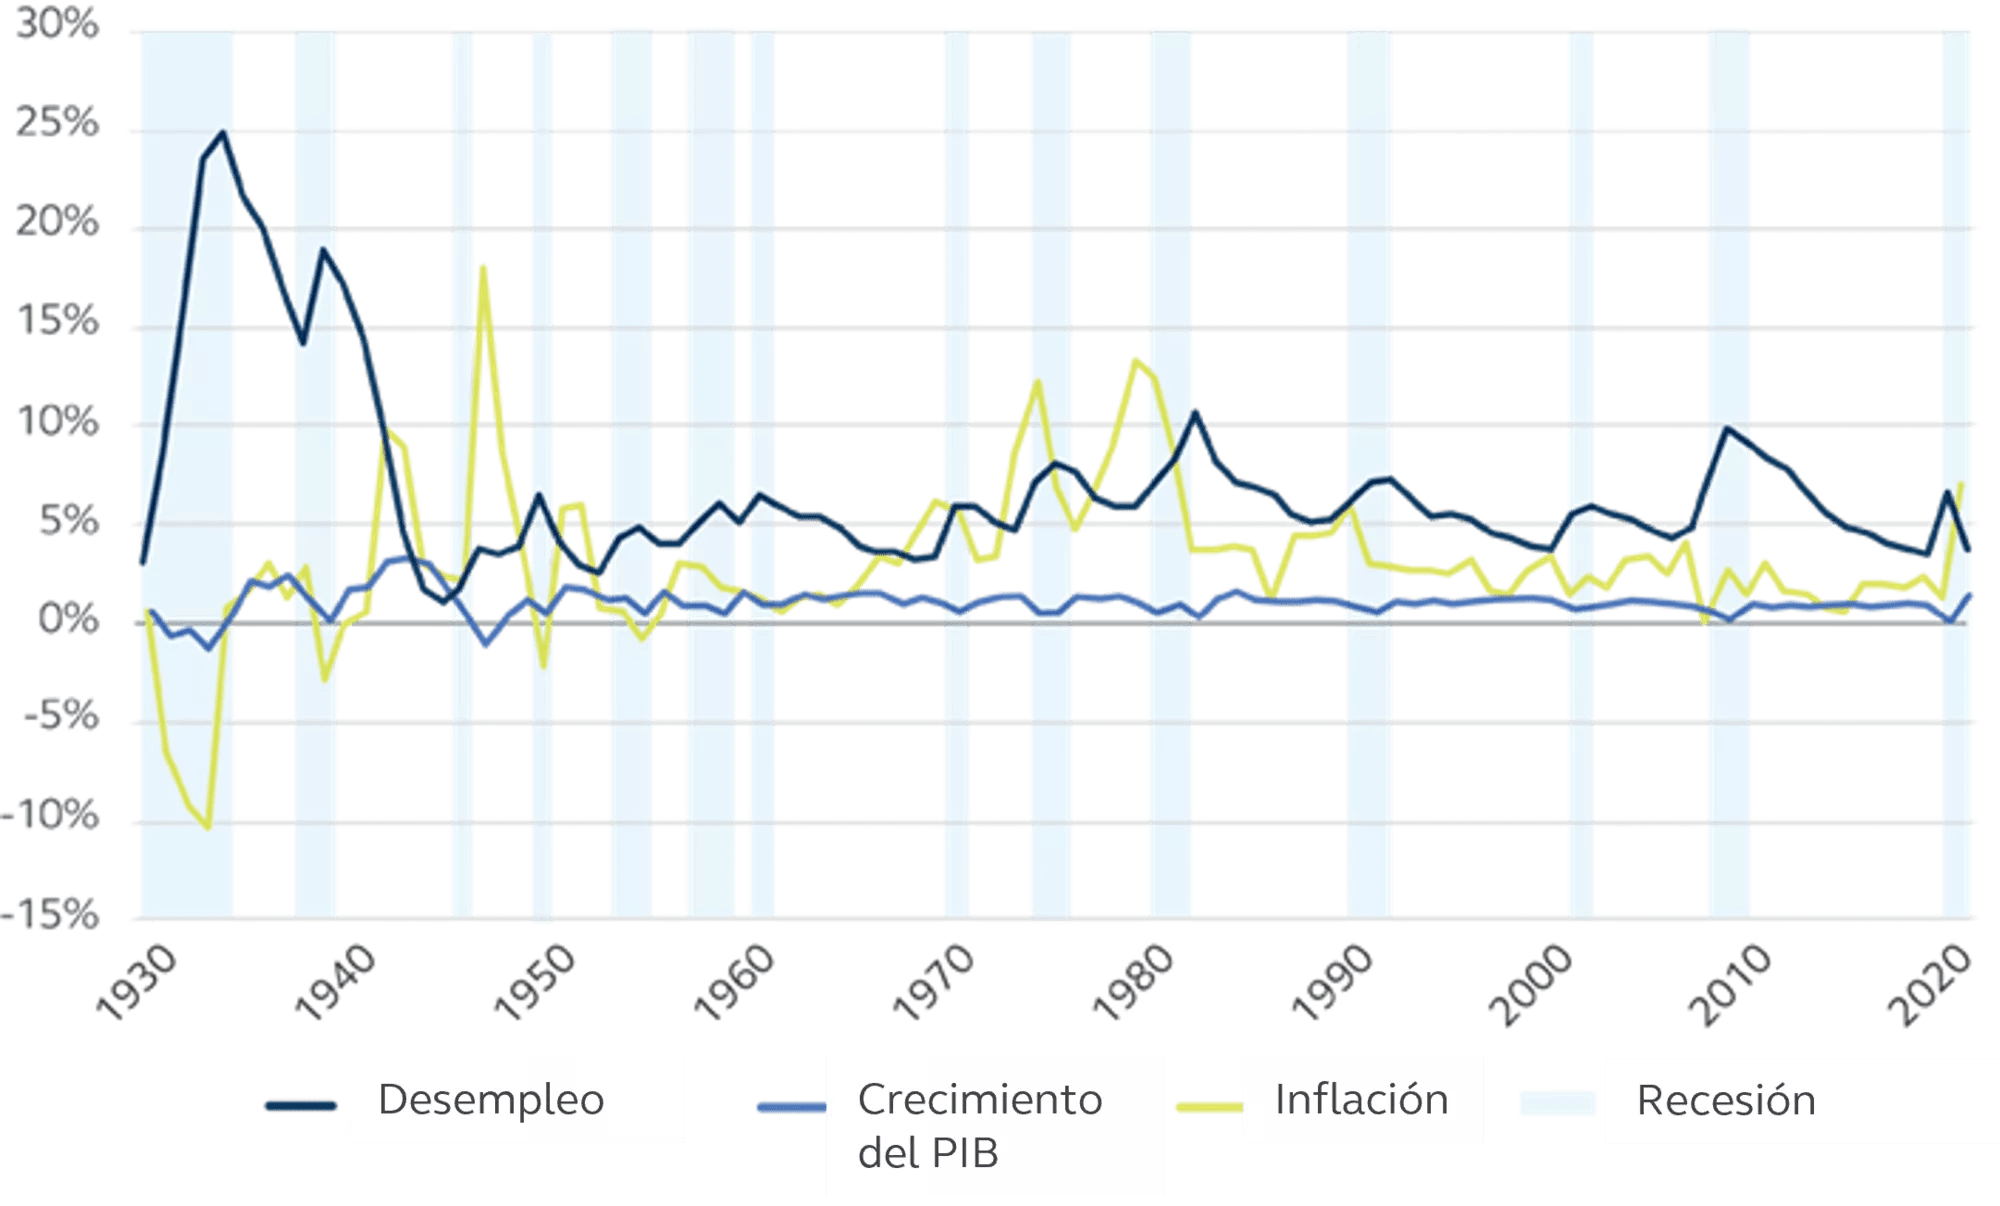 Chart of U.S. recessions, GDP, inflation, and unemployment.